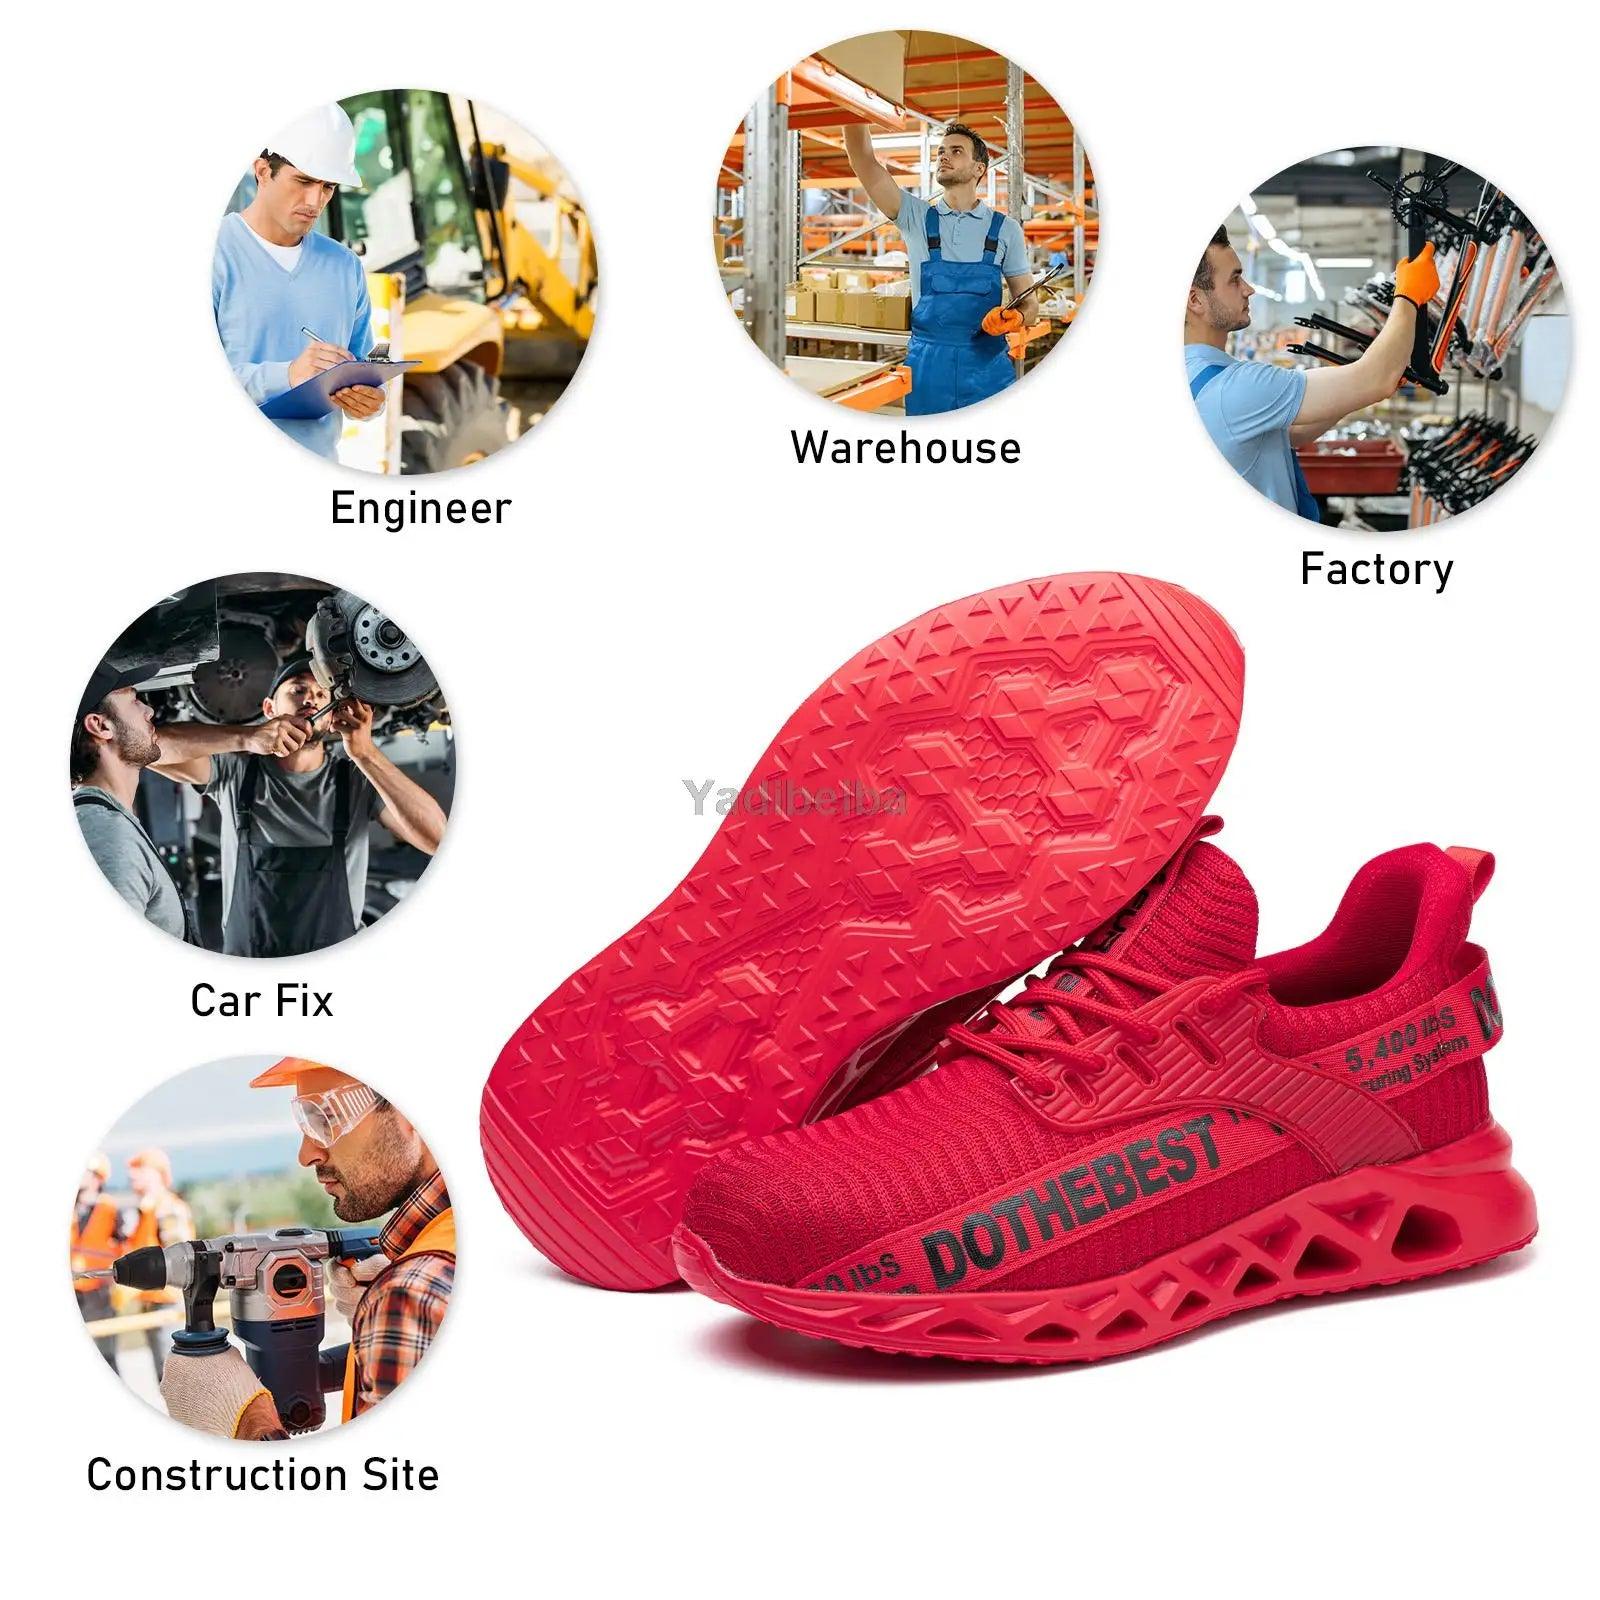 Durable Unisex Steel Toe Safety Shoes by Cloud Discoveries - Lightweight Puncture-Proof Work Sneakers for Men and Women.